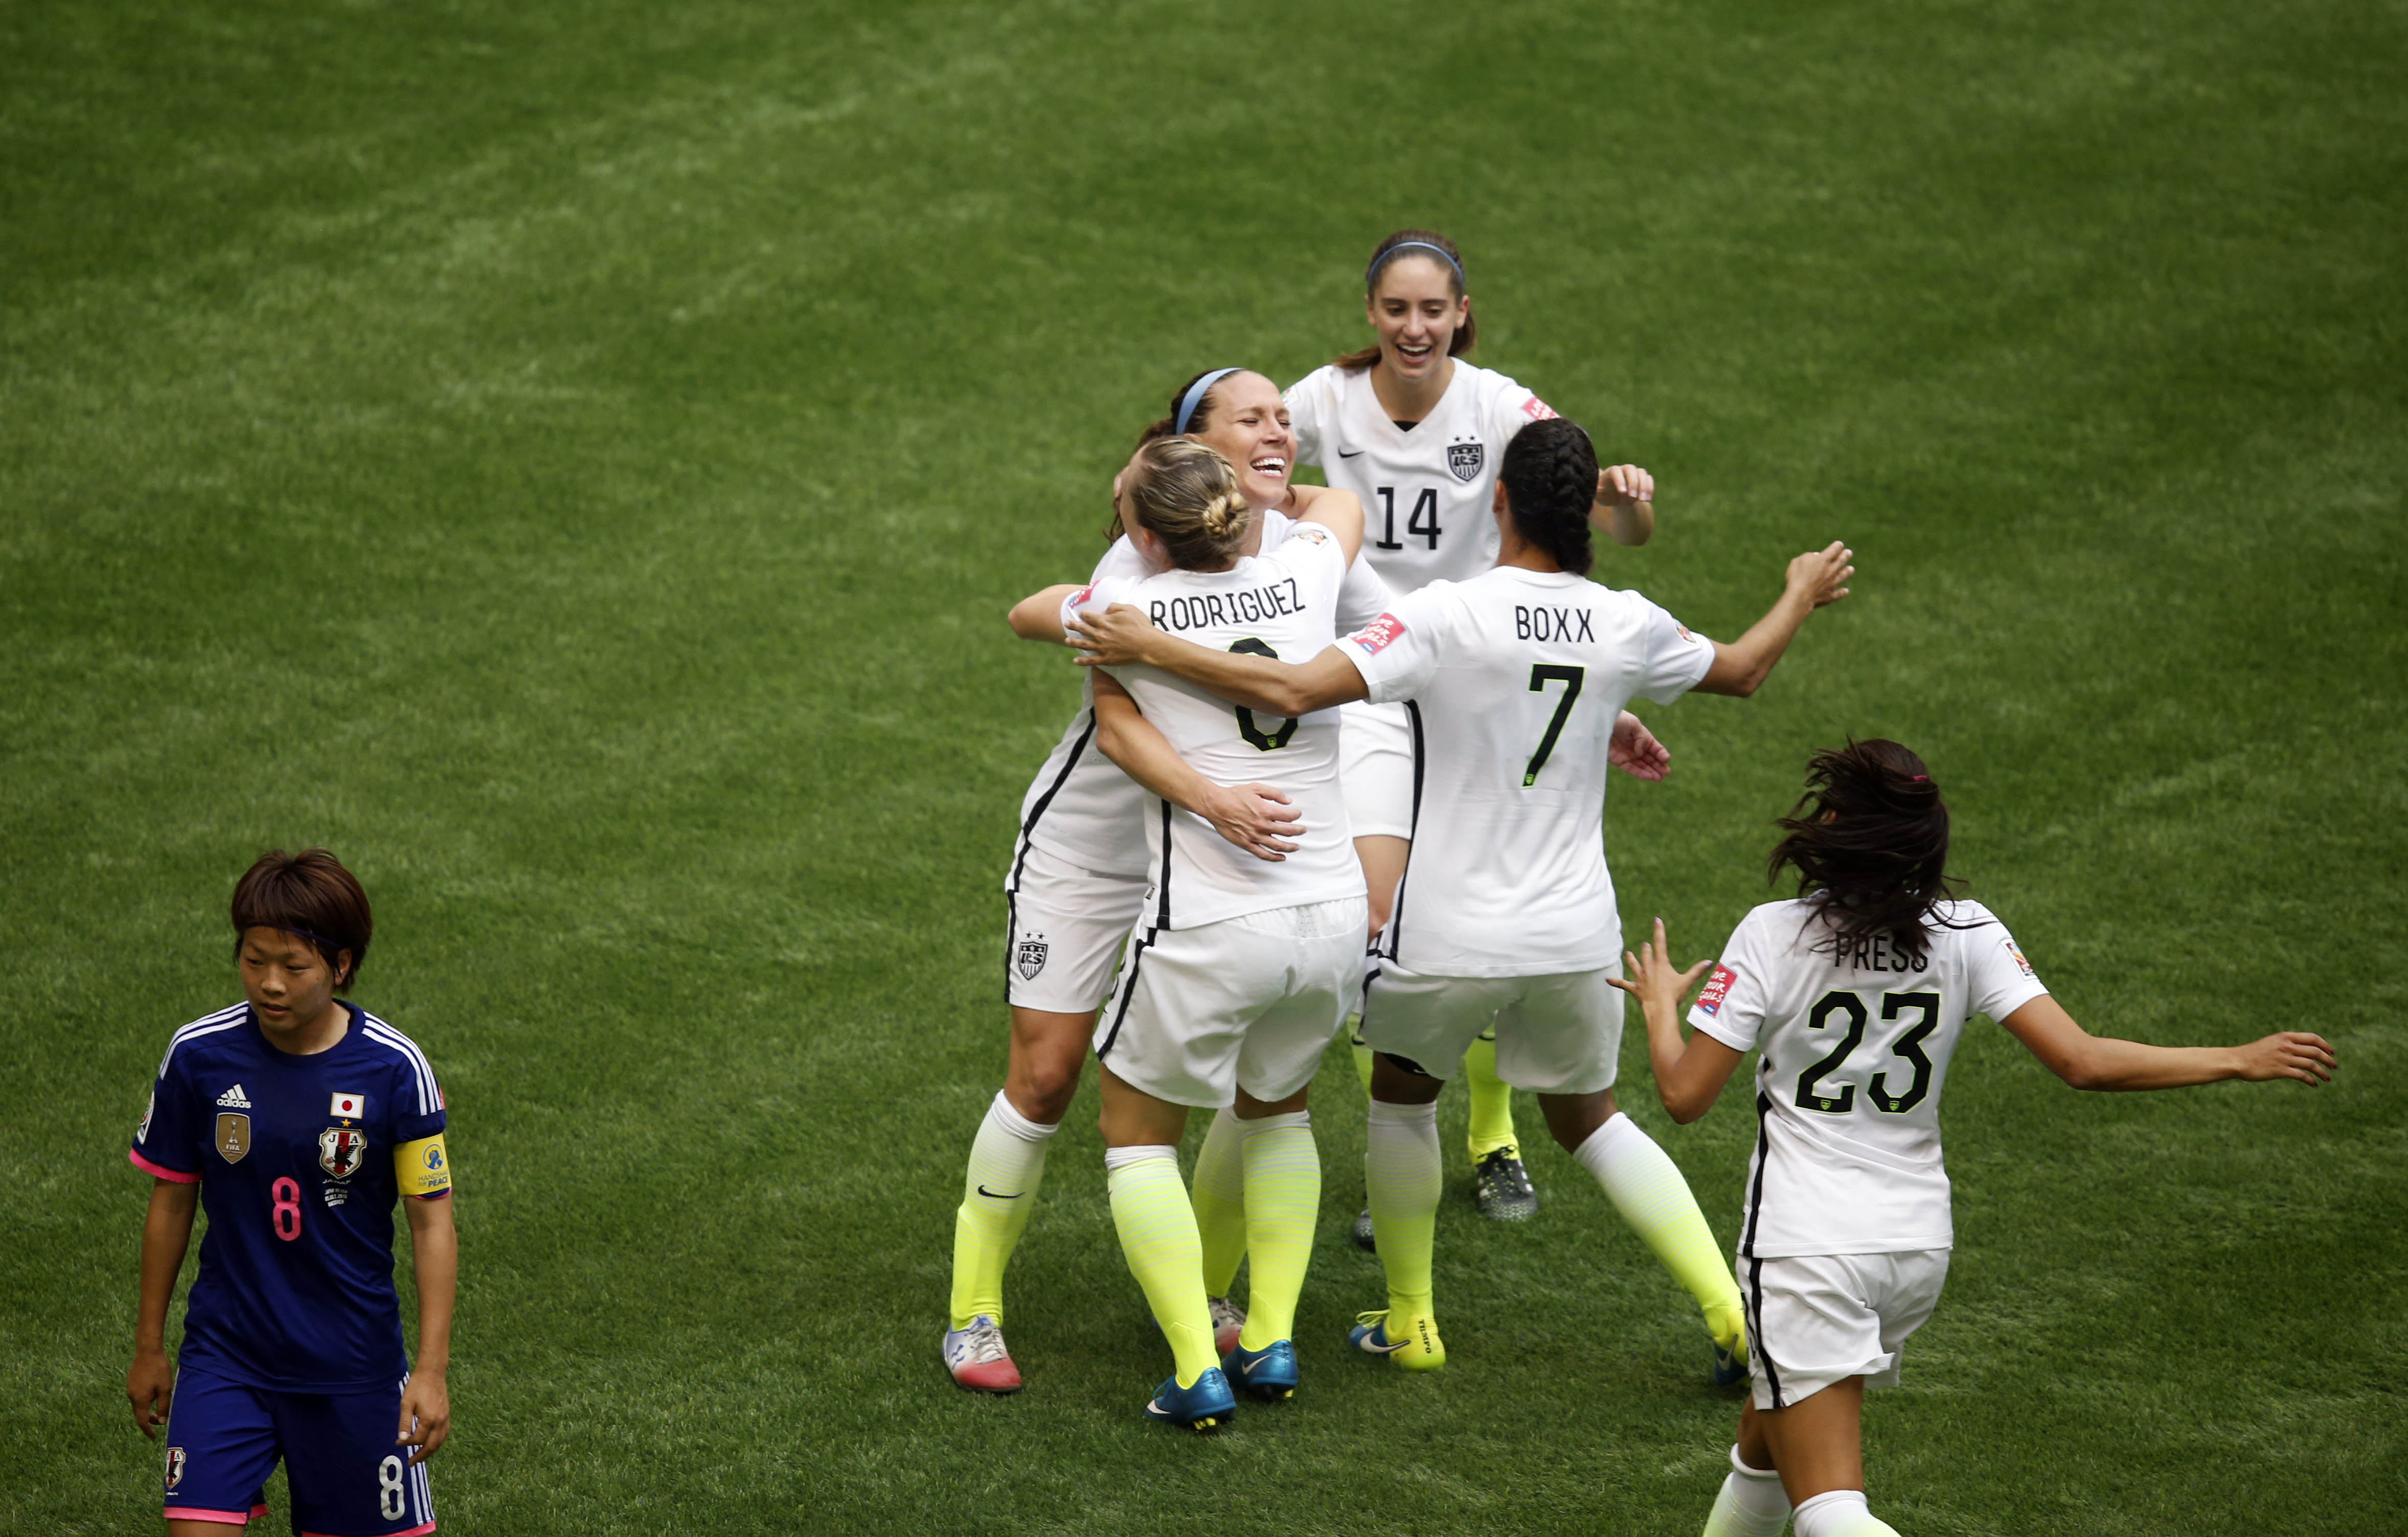 20 breathtaking photos from the U.S.'s unforgettable World Cup victory